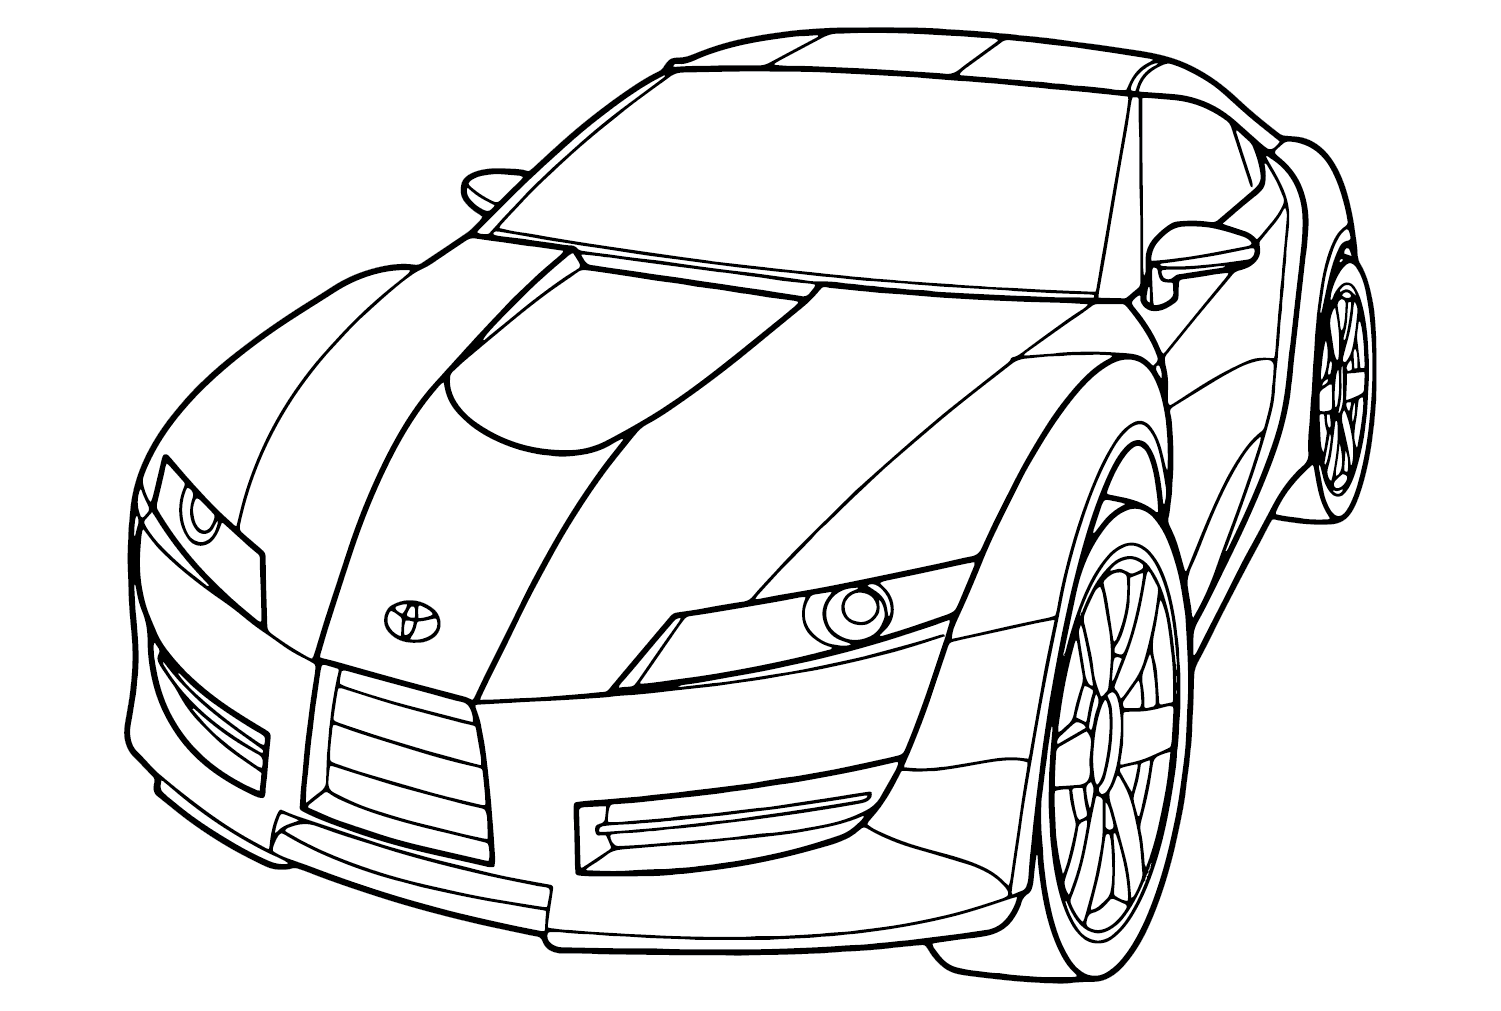 Toyota supra coloring page to print